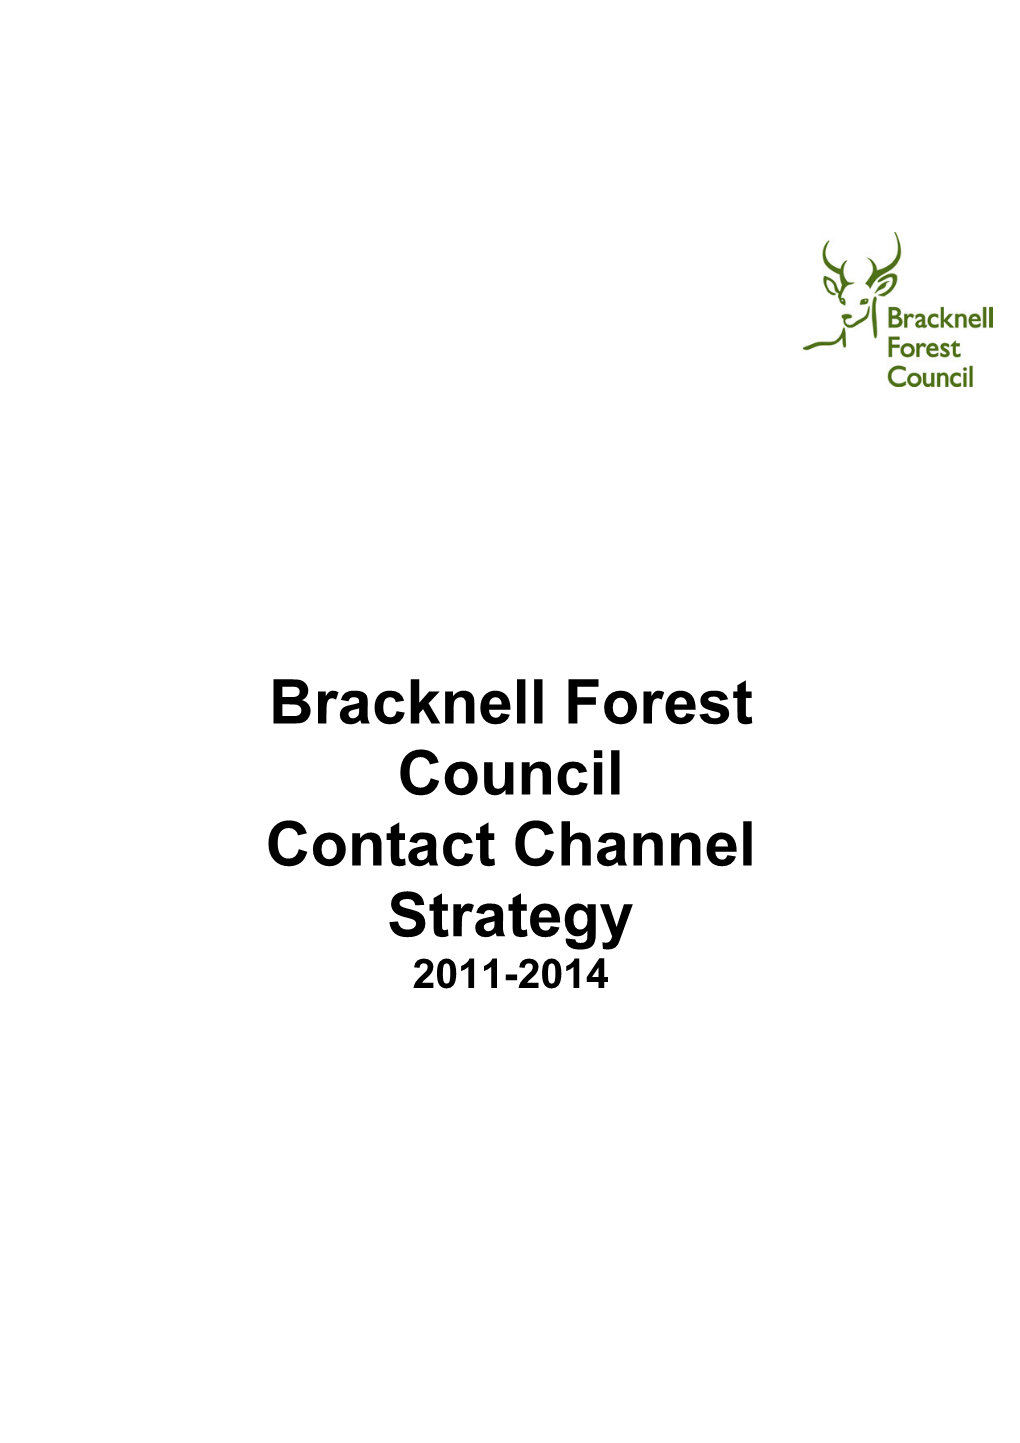 Bracknell Forest Council Contact Channel Strategy 2011-2014